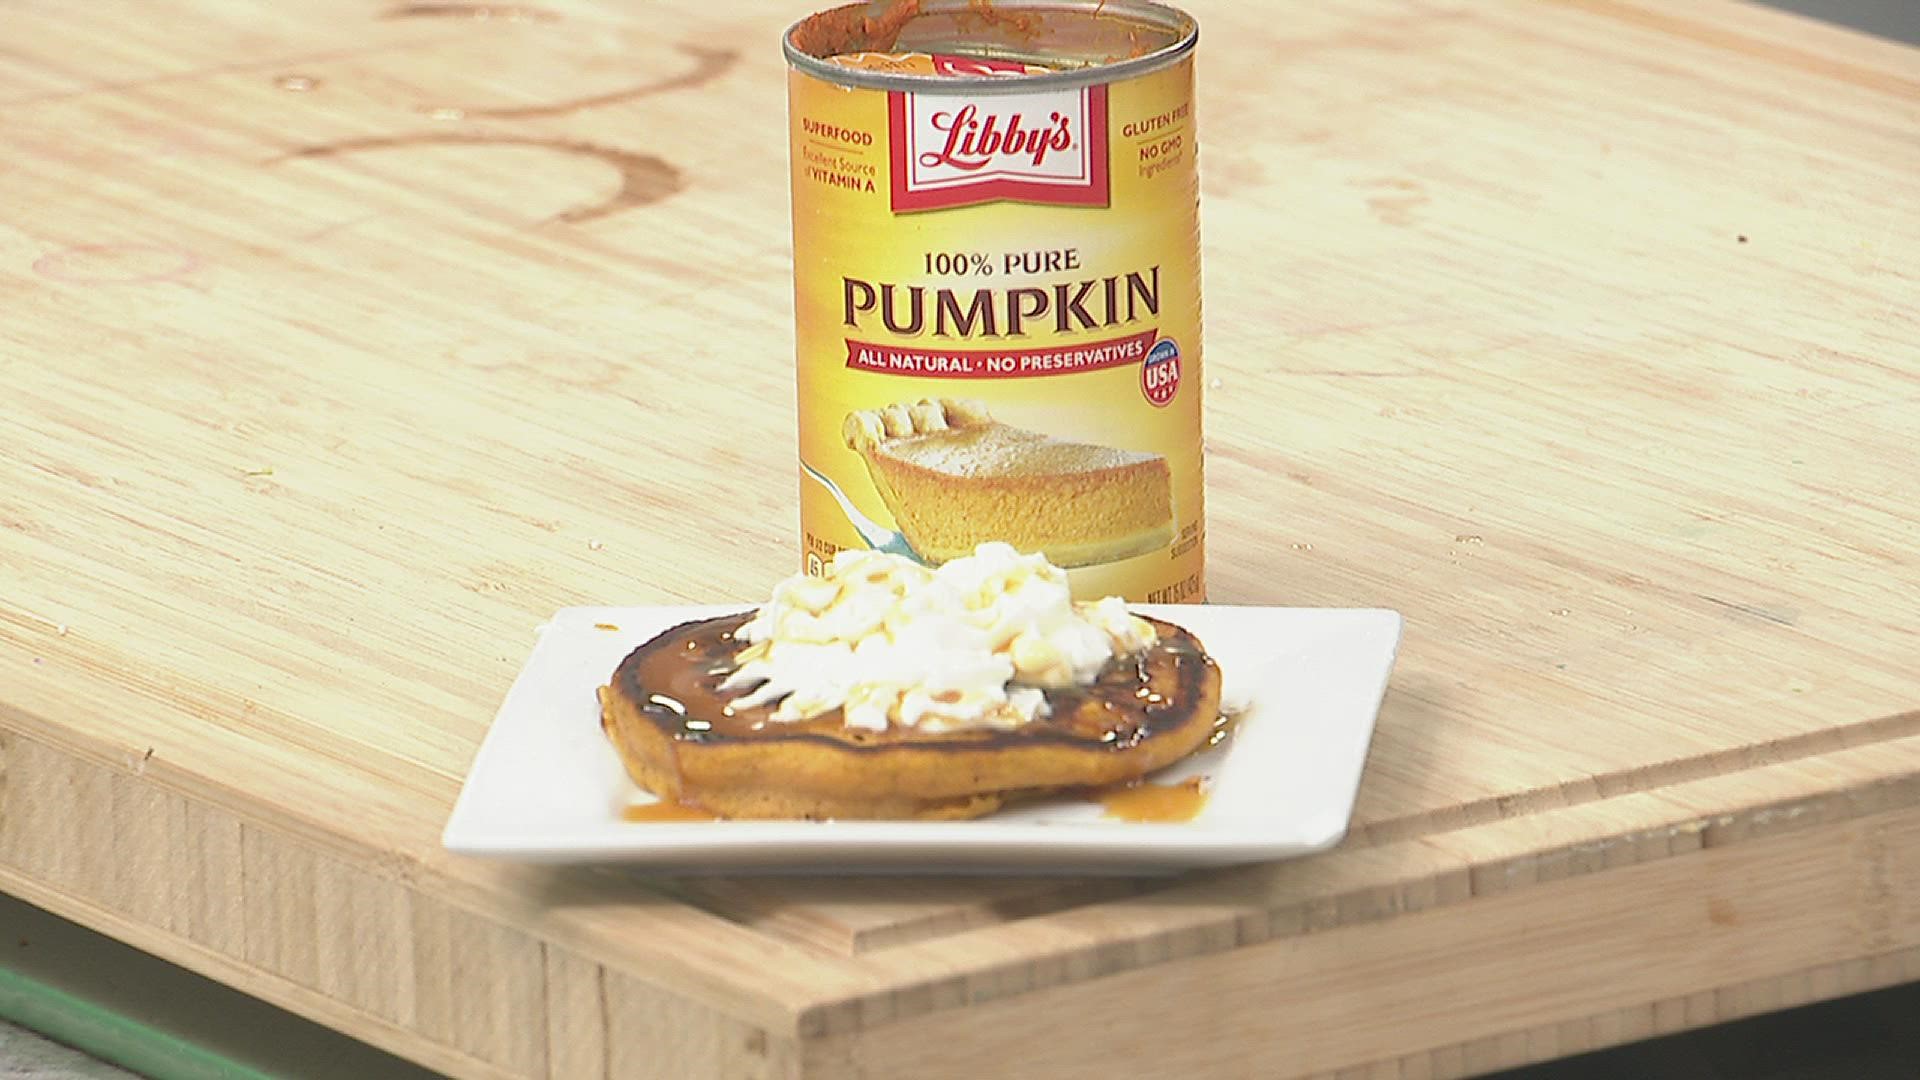 Pumpkin Spice and Everything Nice... but is it Always Delicious?